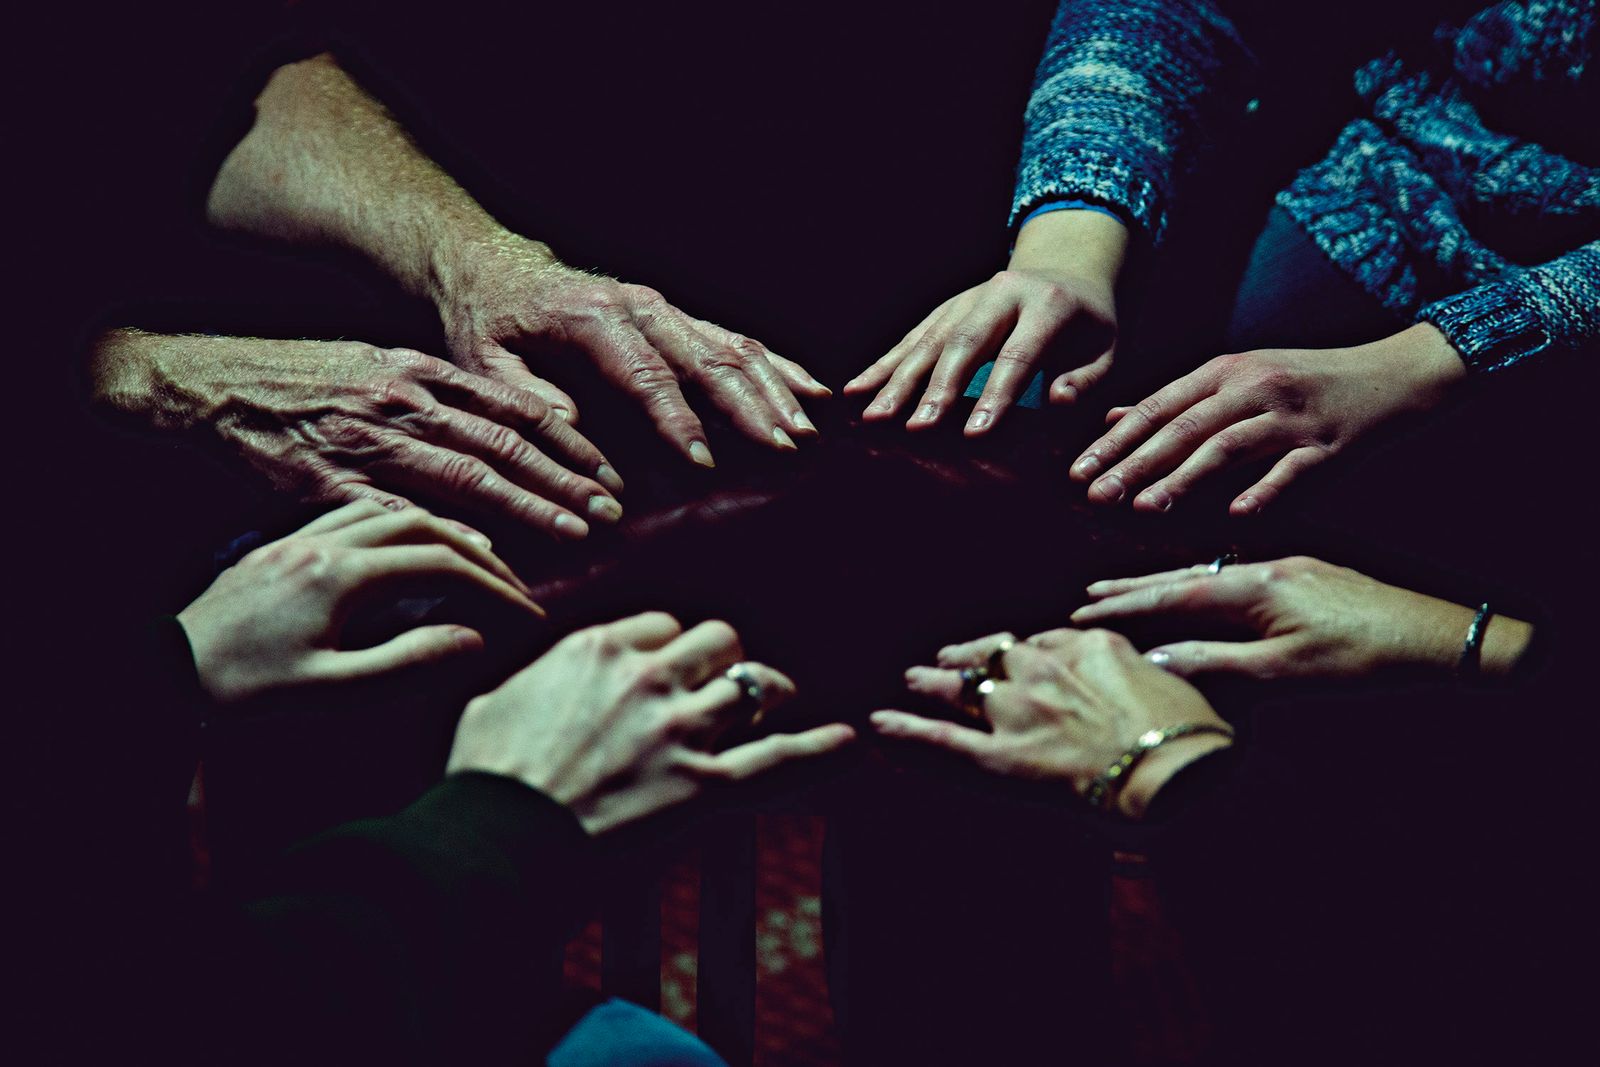 © Shannon Taggart - Image from the SÉANCE photography project